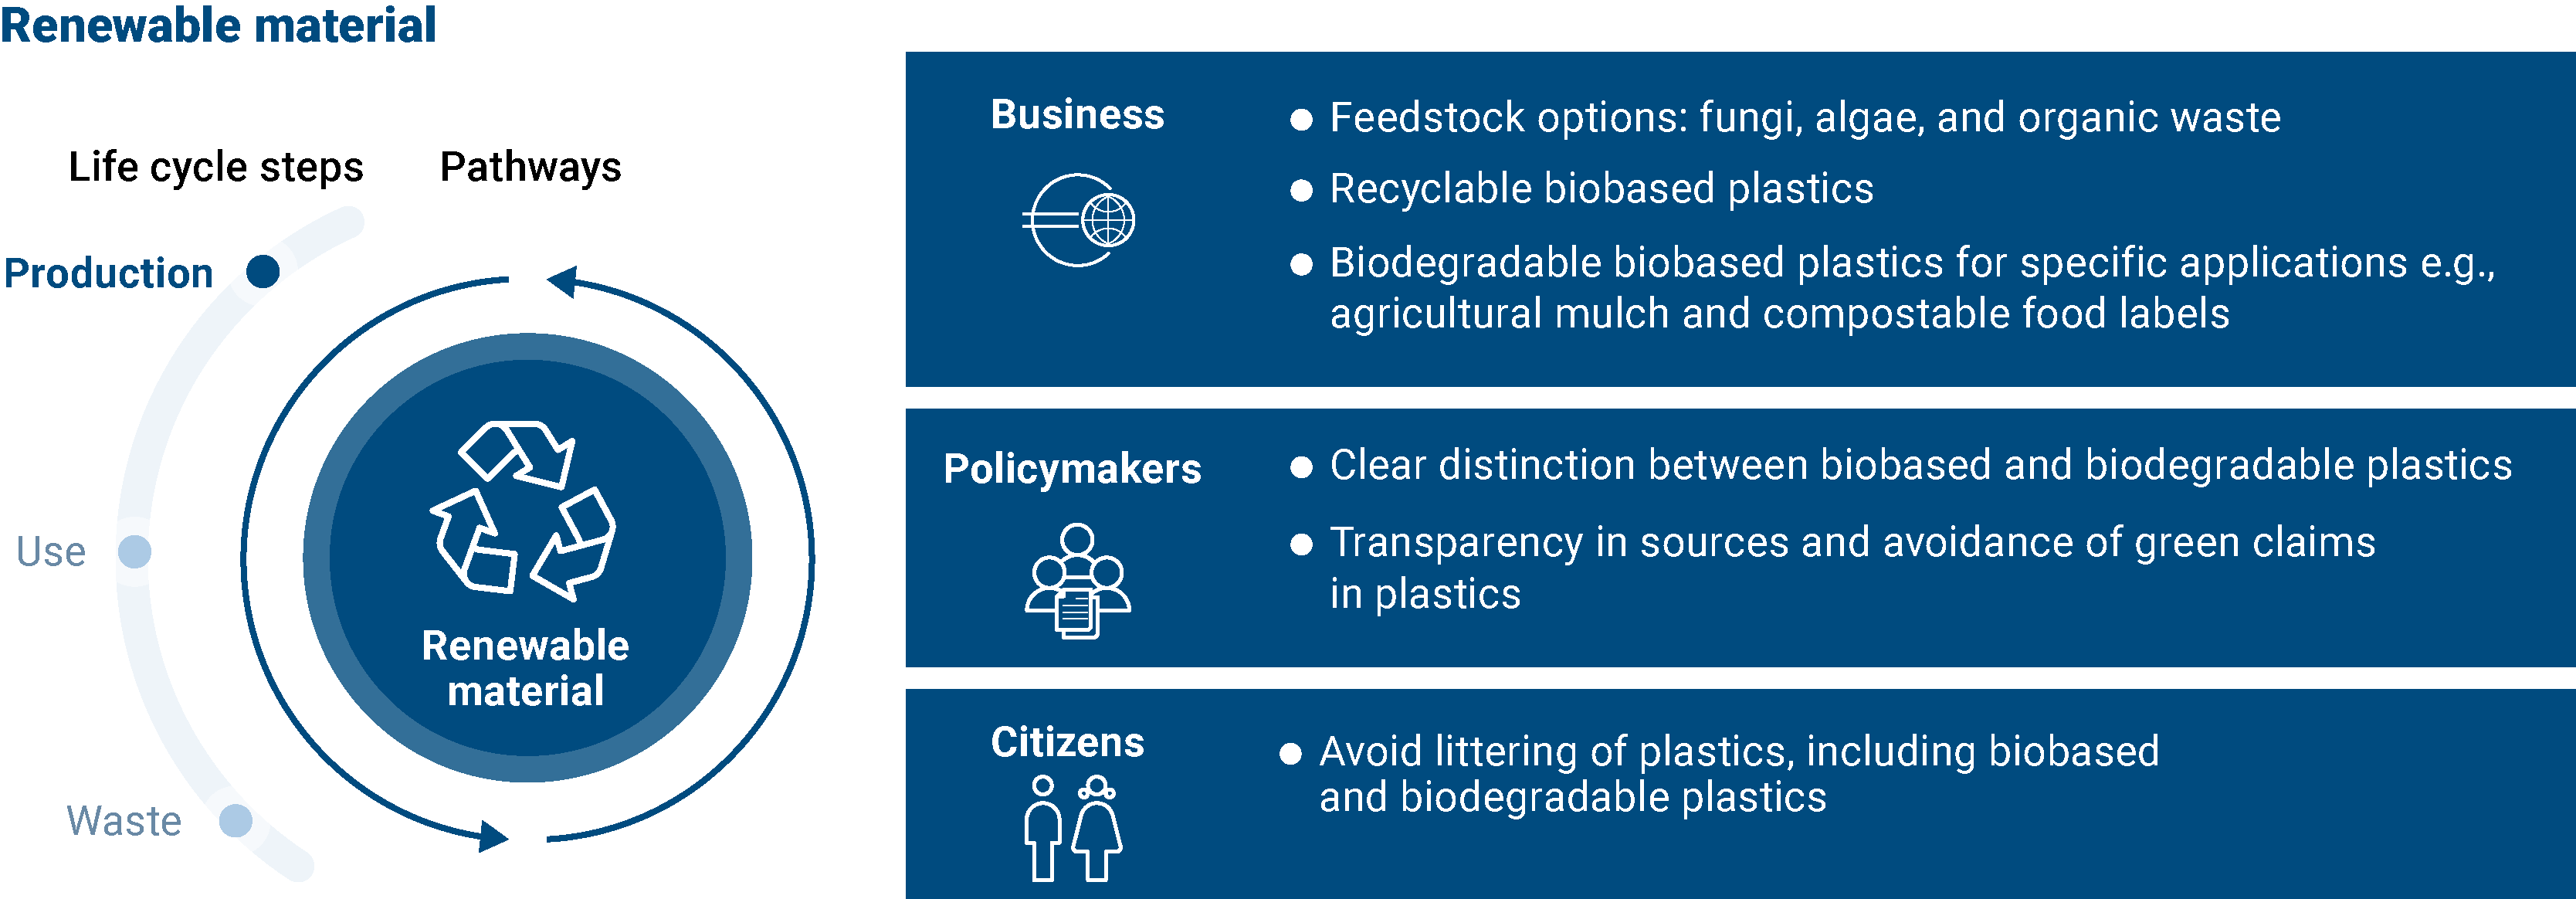 Note: The life cycle steps highlighted in blue are the ones most relevant for the renewable material pathway, but are not necessarily the only ones that can be found. Source: Developed by the EEA and the European Topic Centre on Circular Economy and Resource Use (ETC/CE) — illustration by the Collaborating Centre on Sustainable Consumption and Production (CSCP) and the EEA.